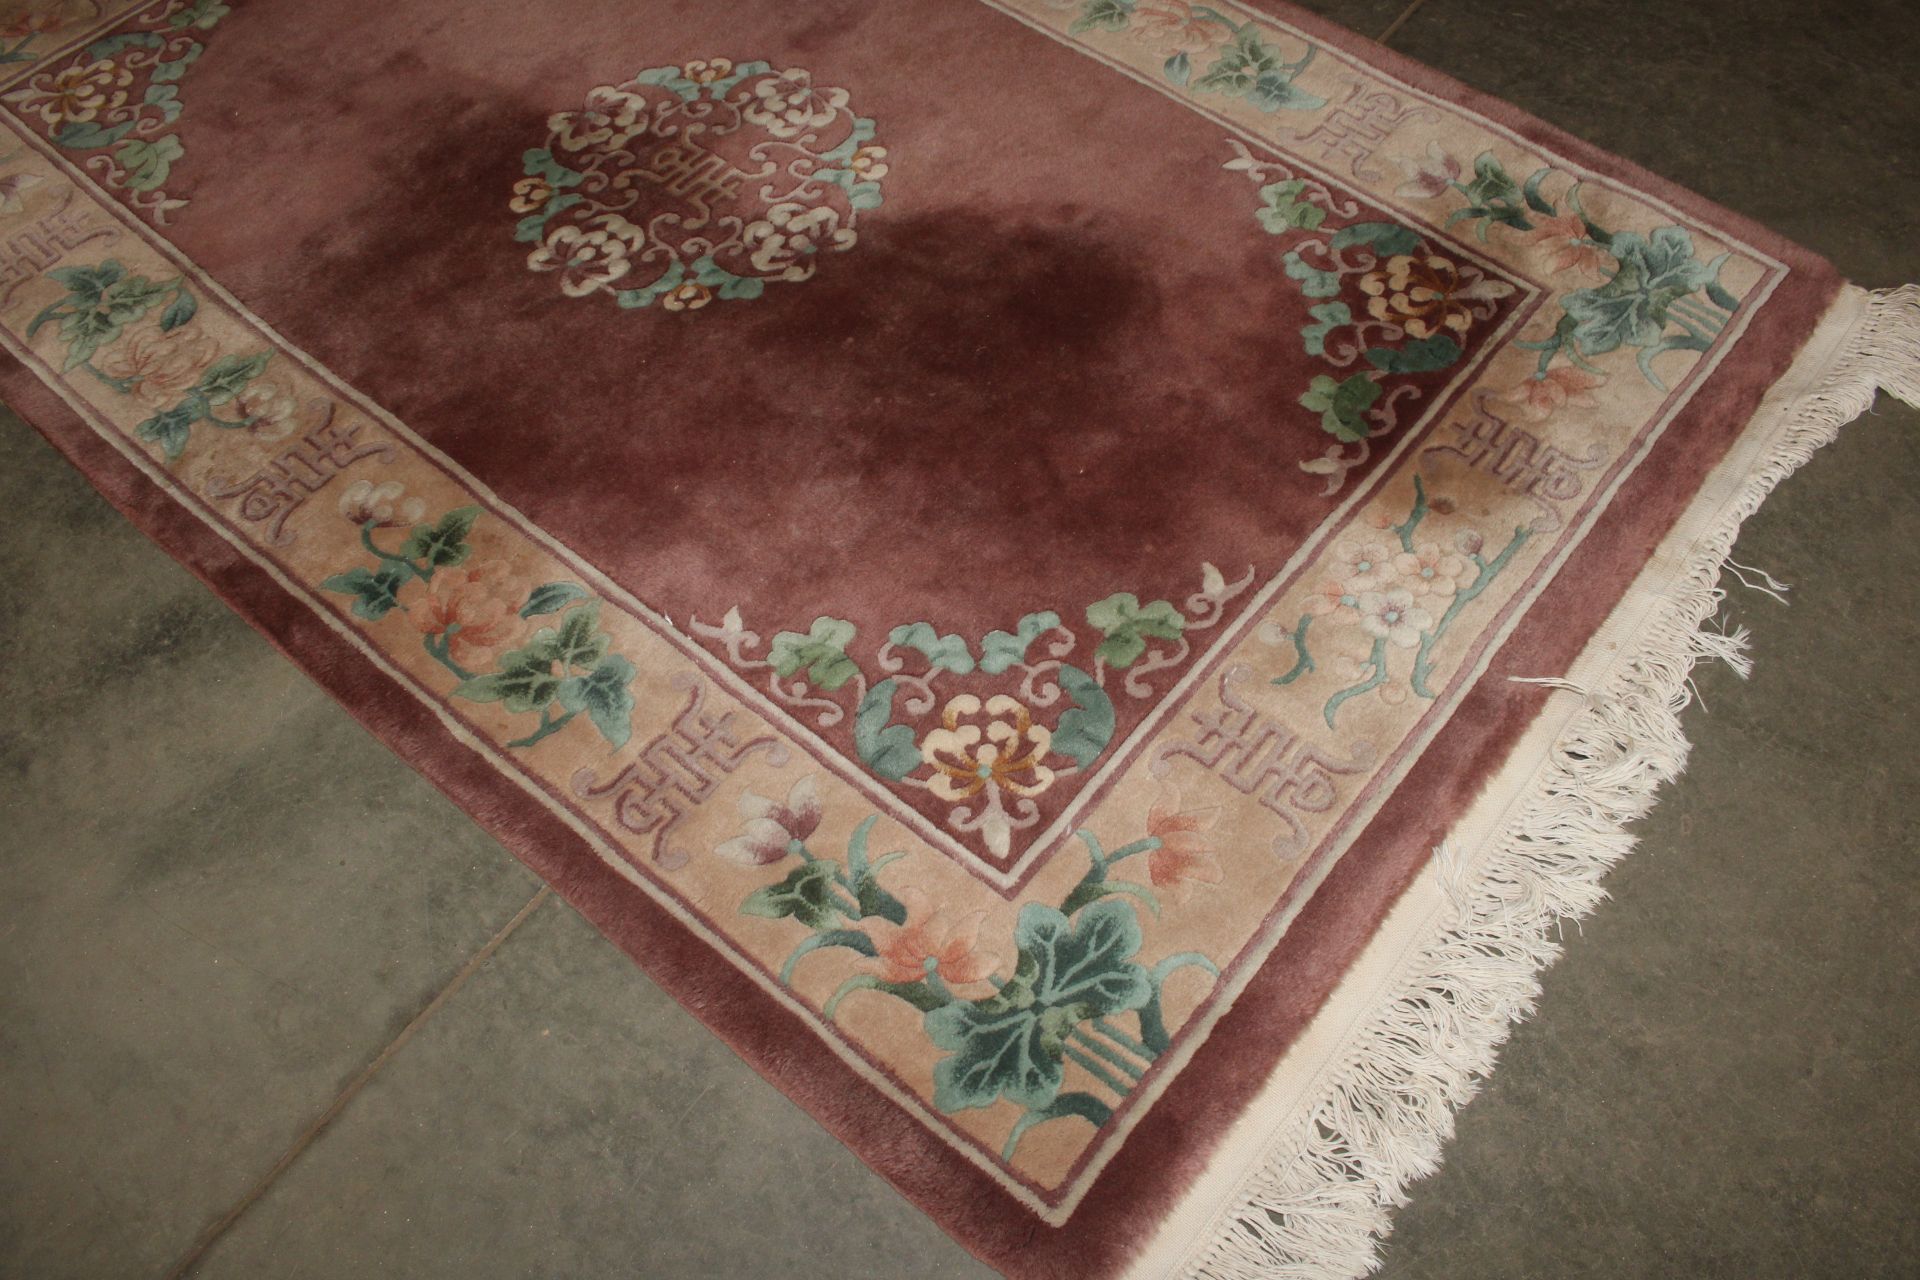 An approx. 7' x 4' "' Chinese style patterned rug - Image 4 of 5